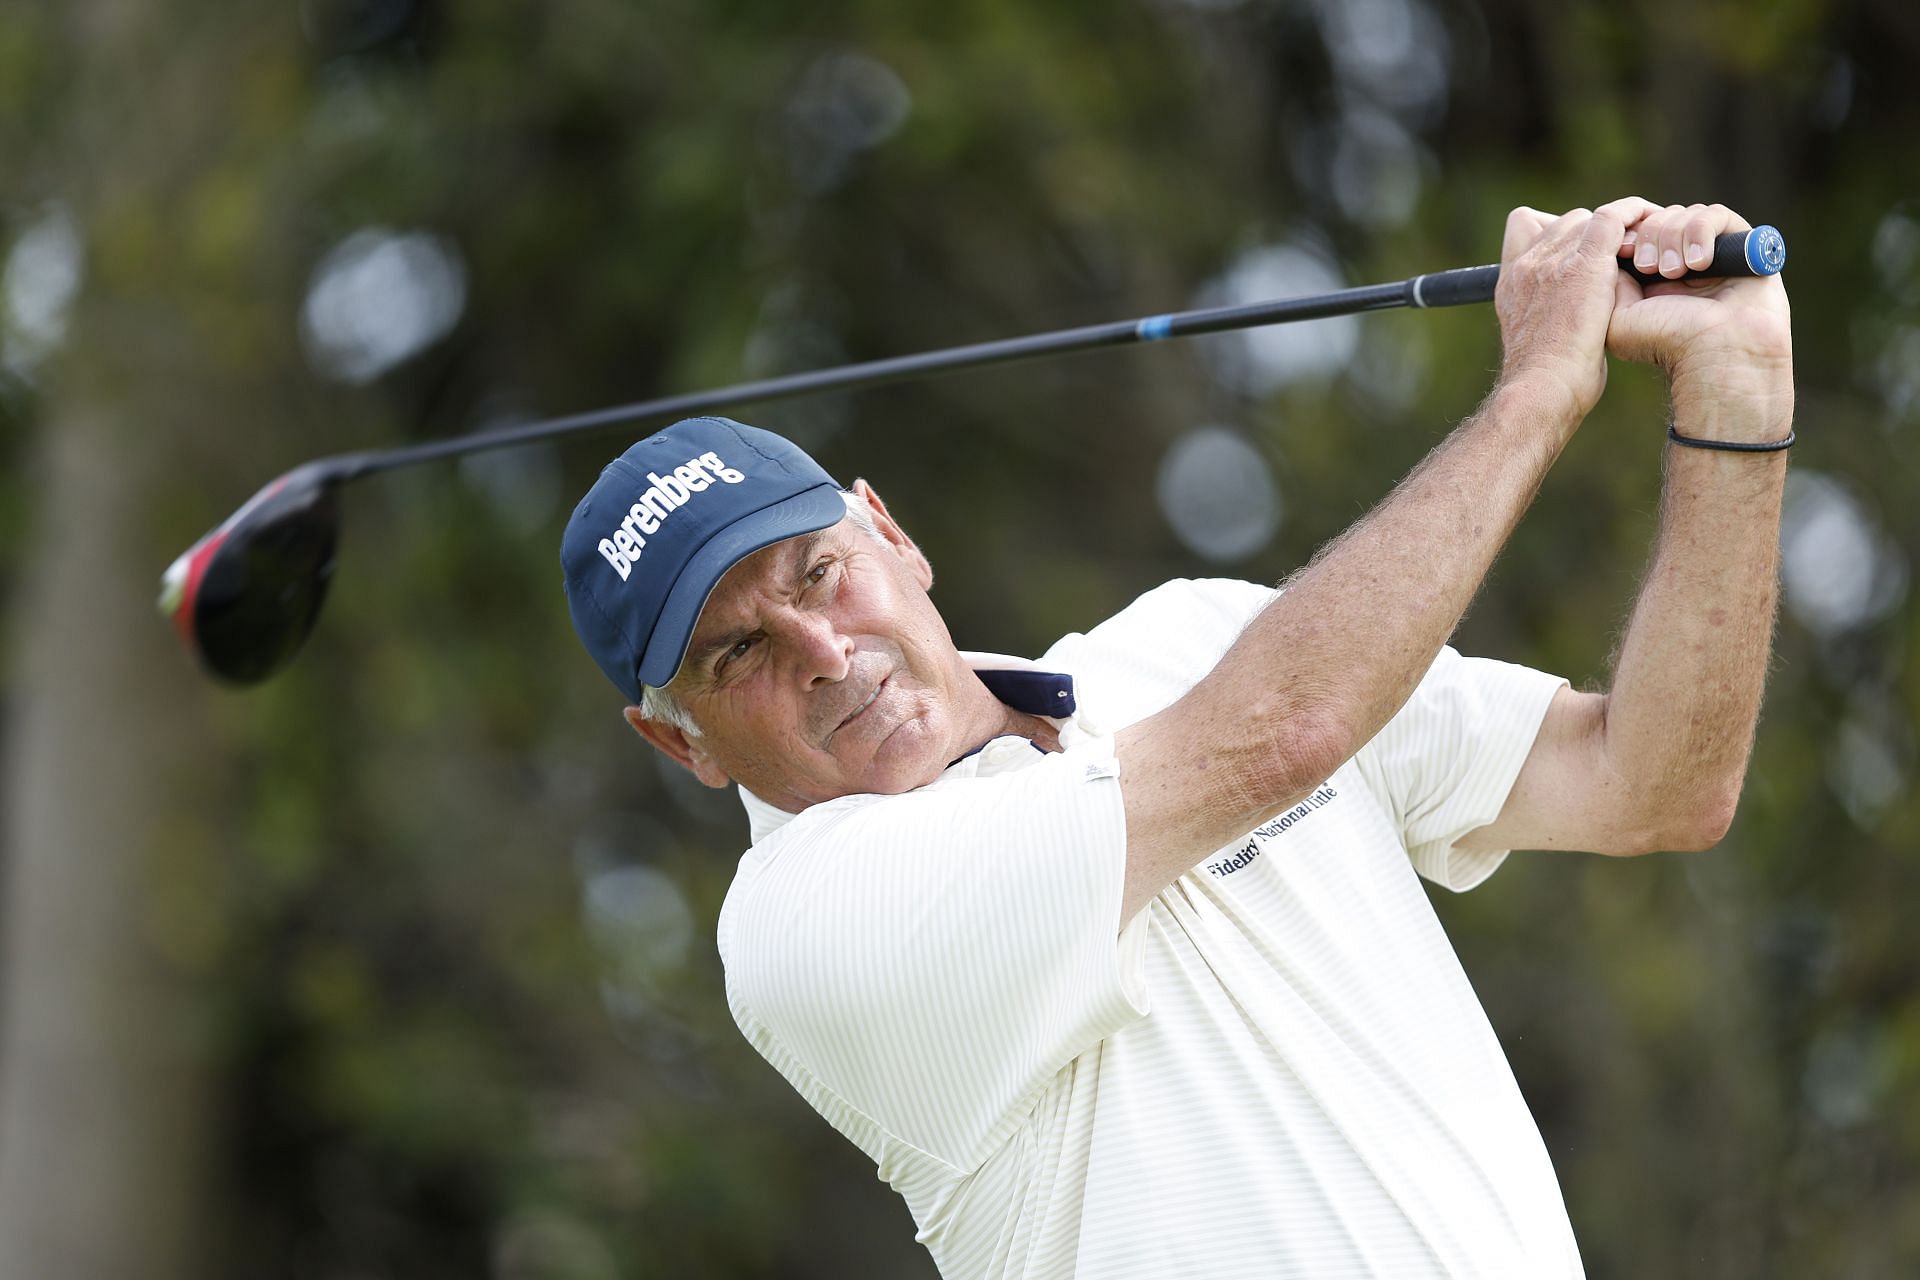 Fred Couples bashed LIV golfers